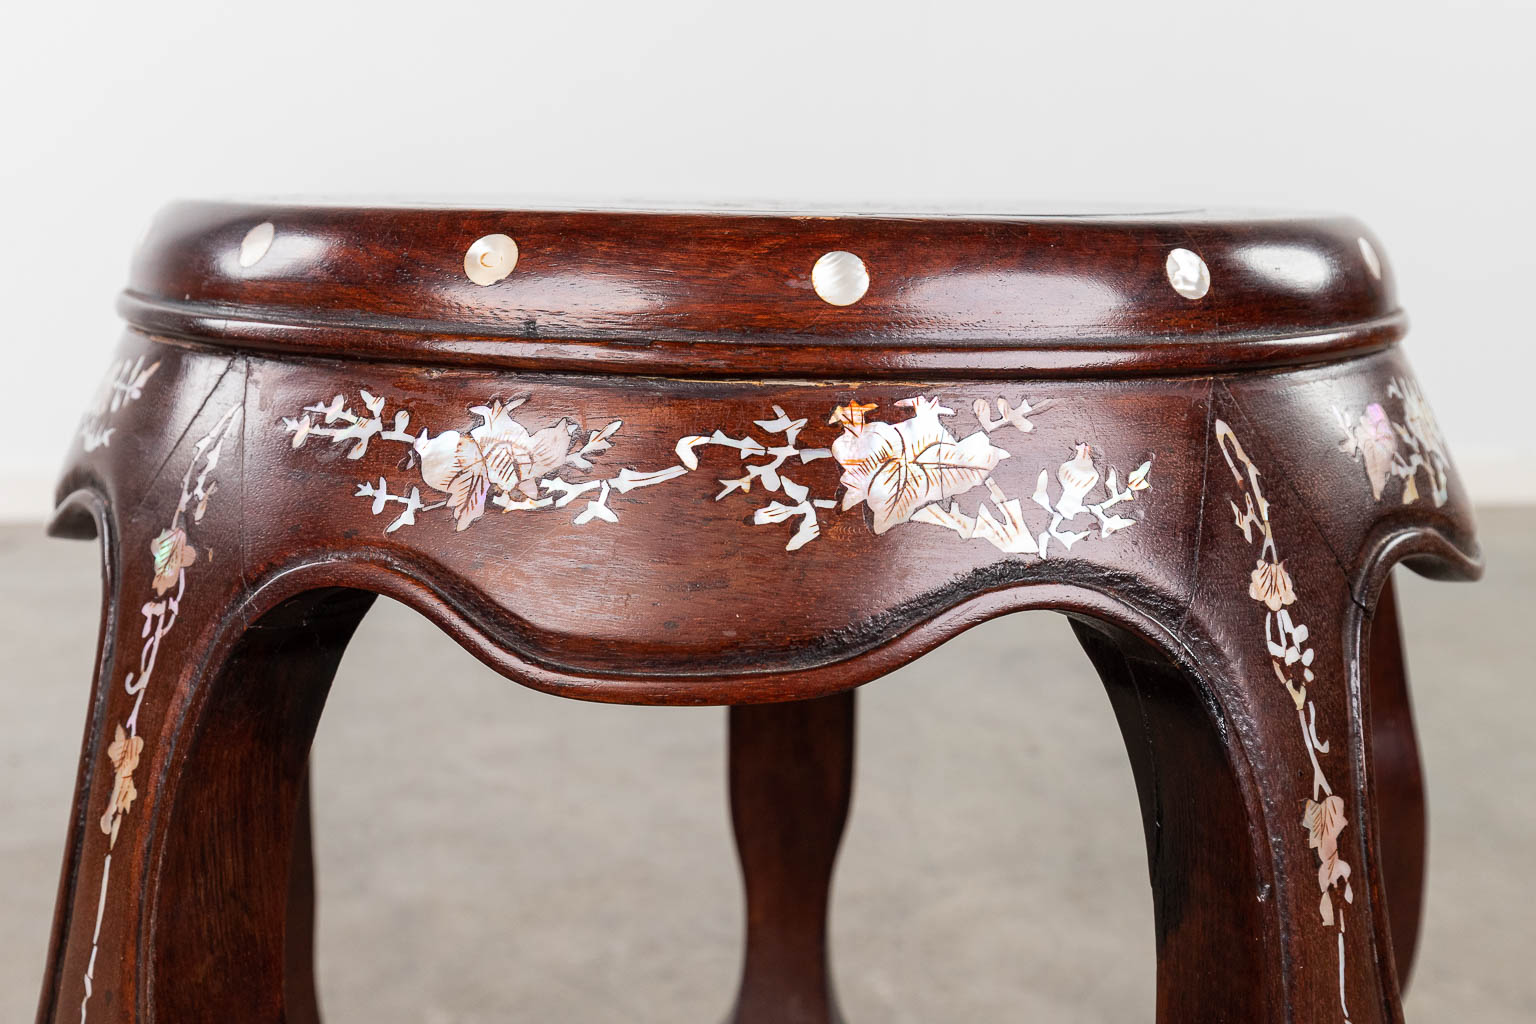 A Chinese hardwood stand, inlaid with mother of pearl. (H: 46 x D: 40 cm)